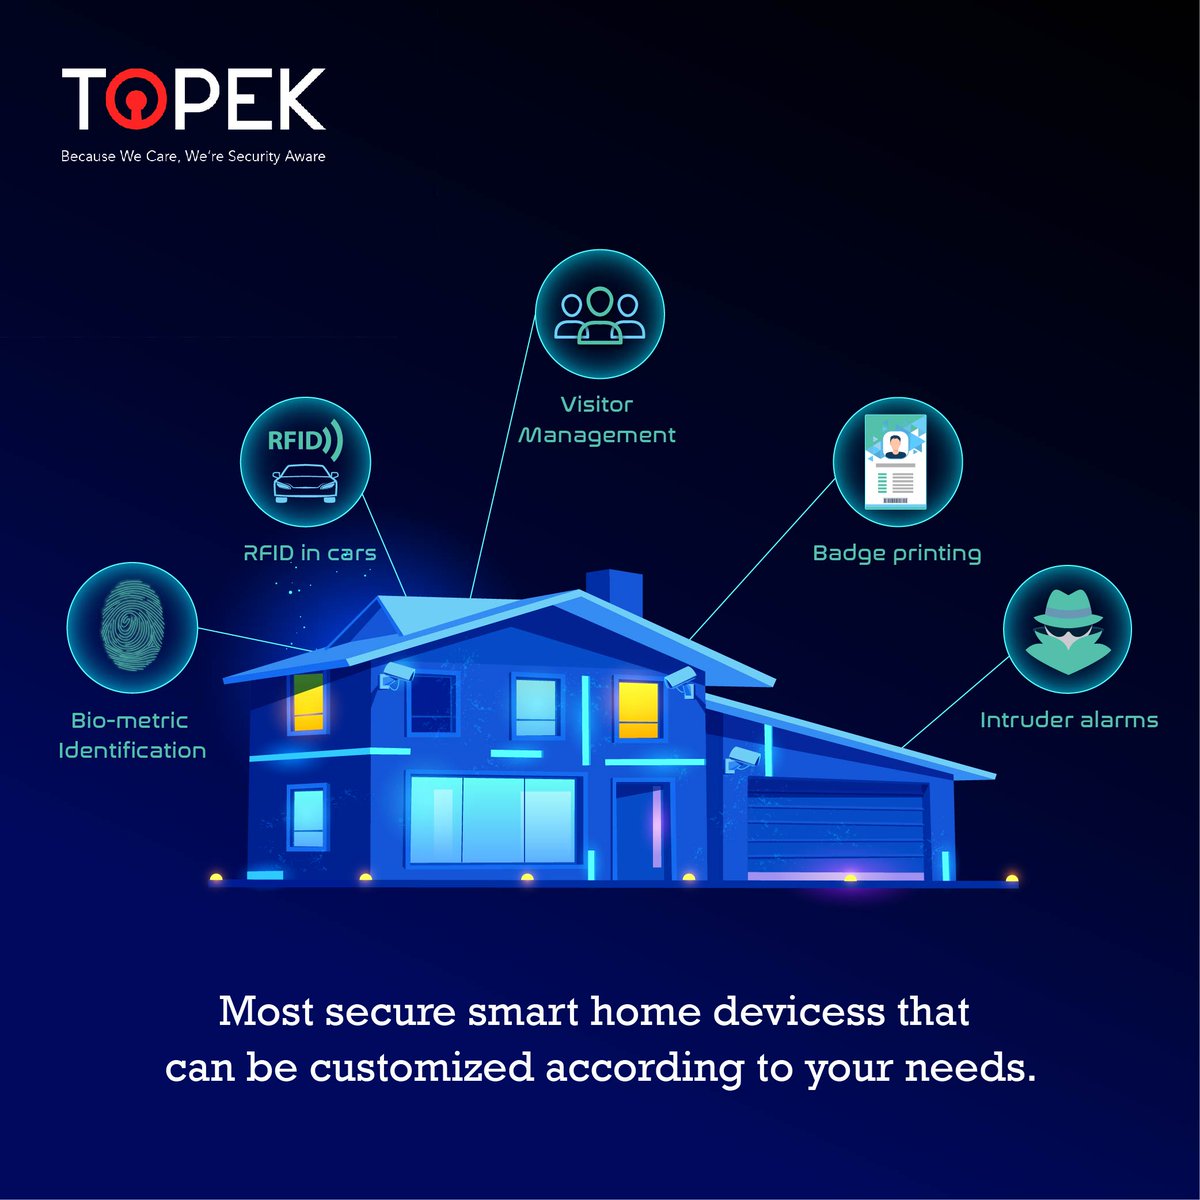 Privacy Matters!
#topek
#topeksecurity
#apartmentsecurity
#flatsecurity
#security
#securitycameras
#securitysystems
#cybersecurity
#securitycompany
#securitydoors
#securityawareness
#securitytips
#securityalaram
#securityhits
#hometechnology
#homeautomationsystem